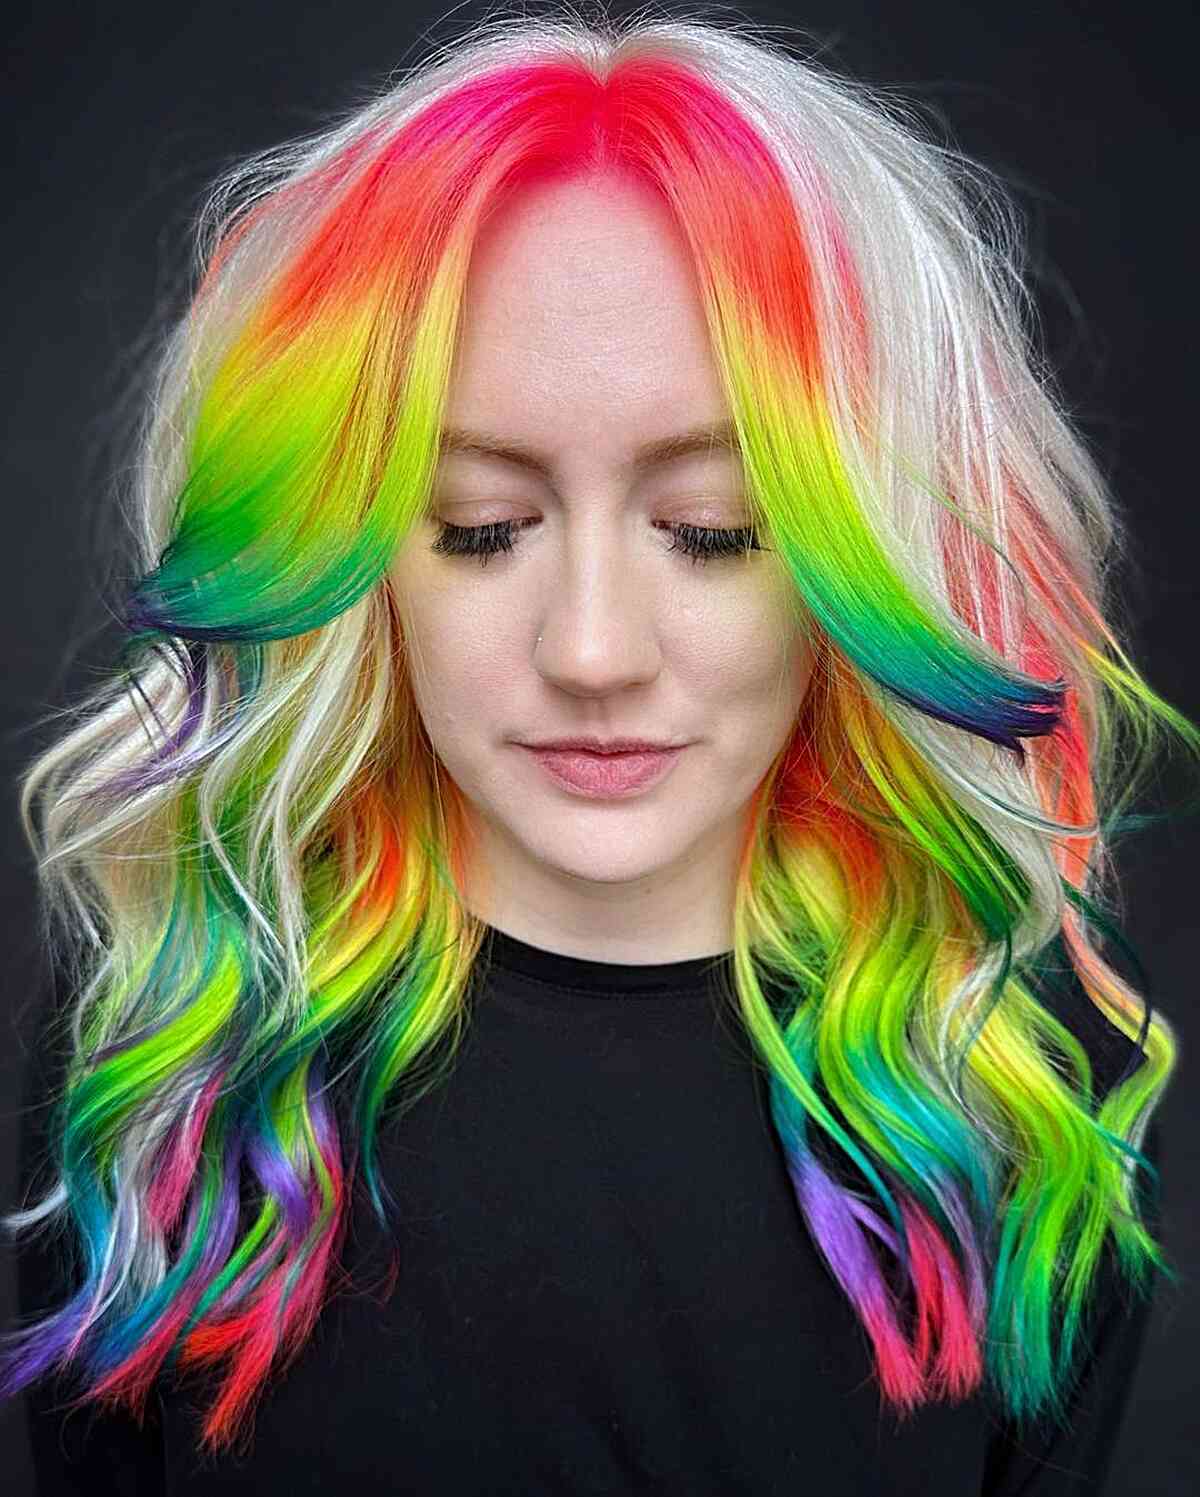 Vivid White Hair with Rainbow Highlights and Money Piece